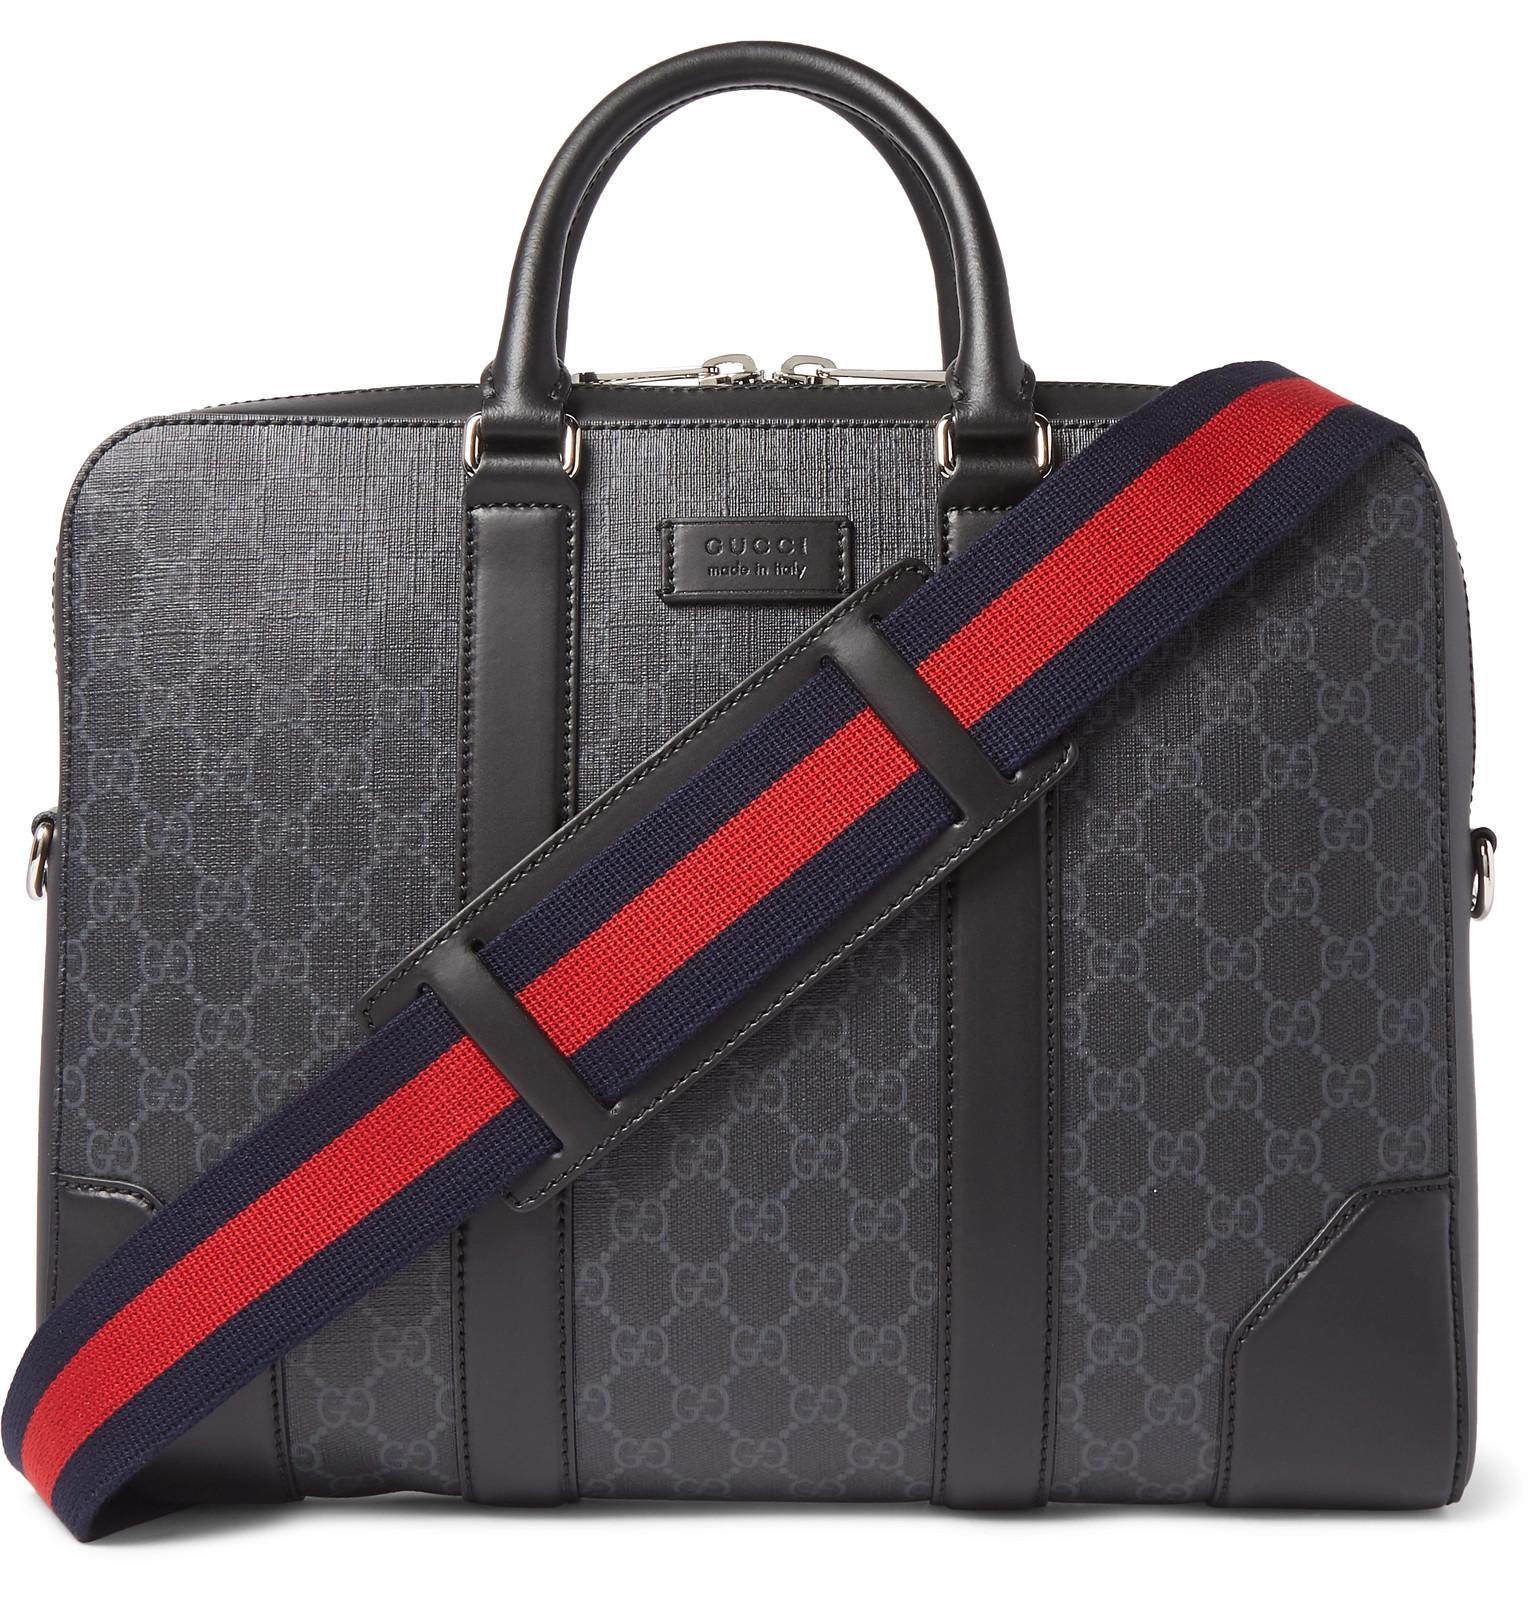 Gucci Leather-trimmed Monogrammed Coated-canvas Briefcase in Black for Men - Lyst